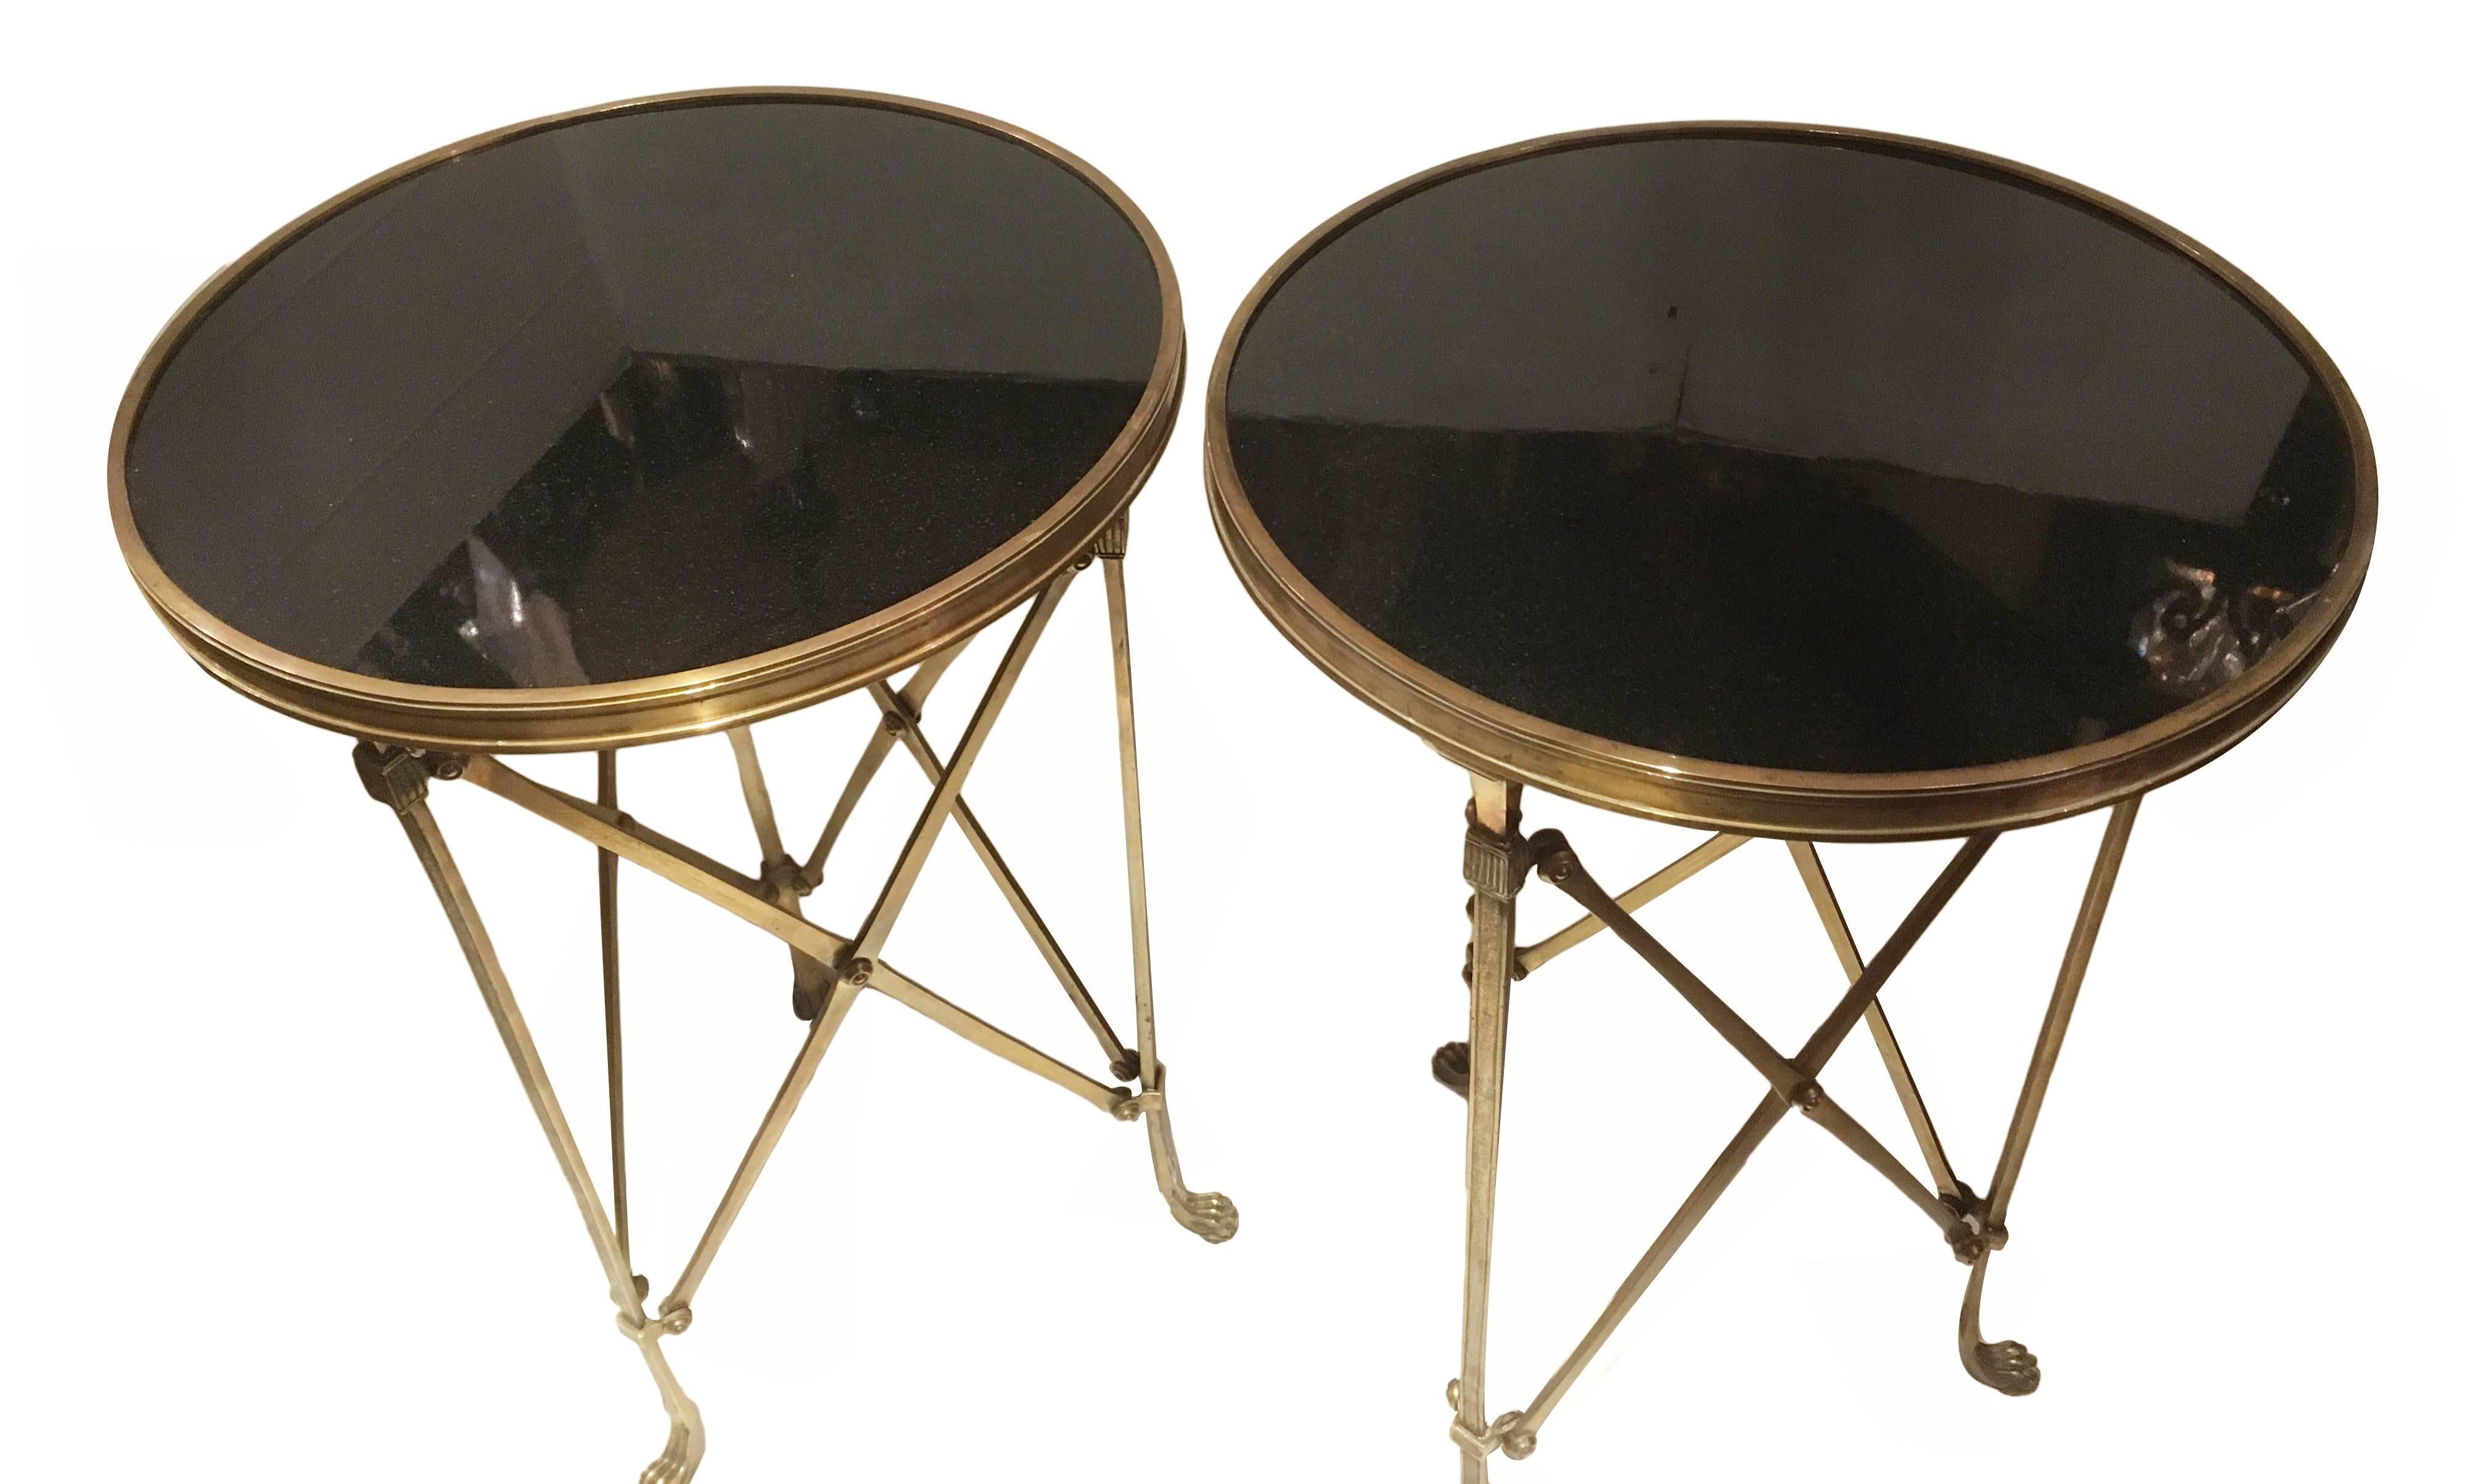 Pair of 1950s French bronze side tables with black marble tops, tripod base with lion's paw feet.

Measures: 27 height, 17 diameter.

 